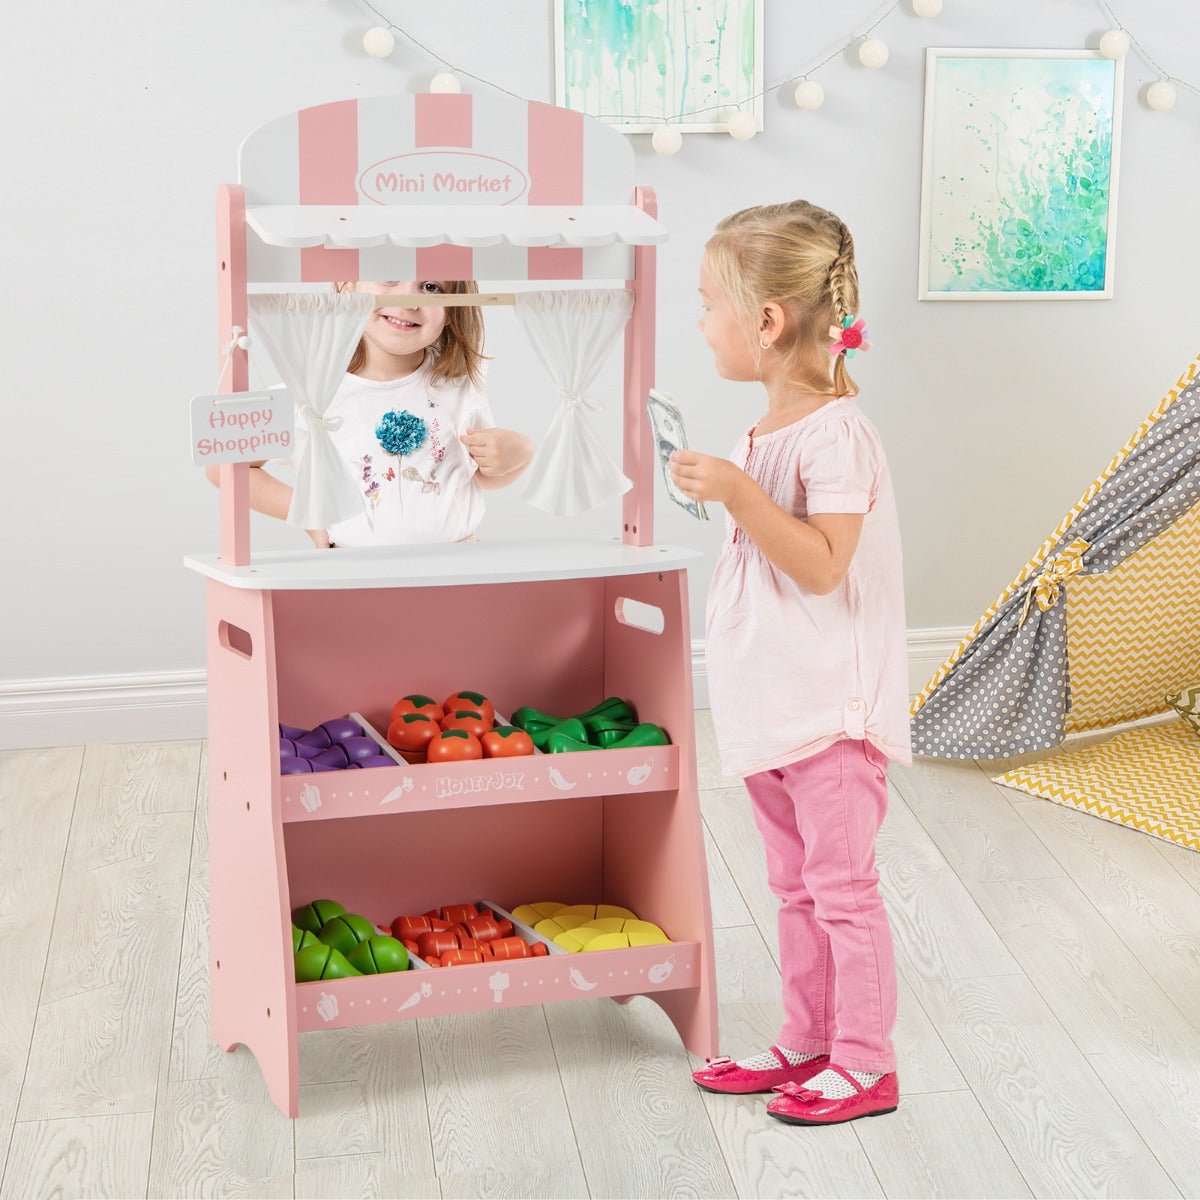 Wooden Grocery Store Set: Where Kids Shop and Play Happily!